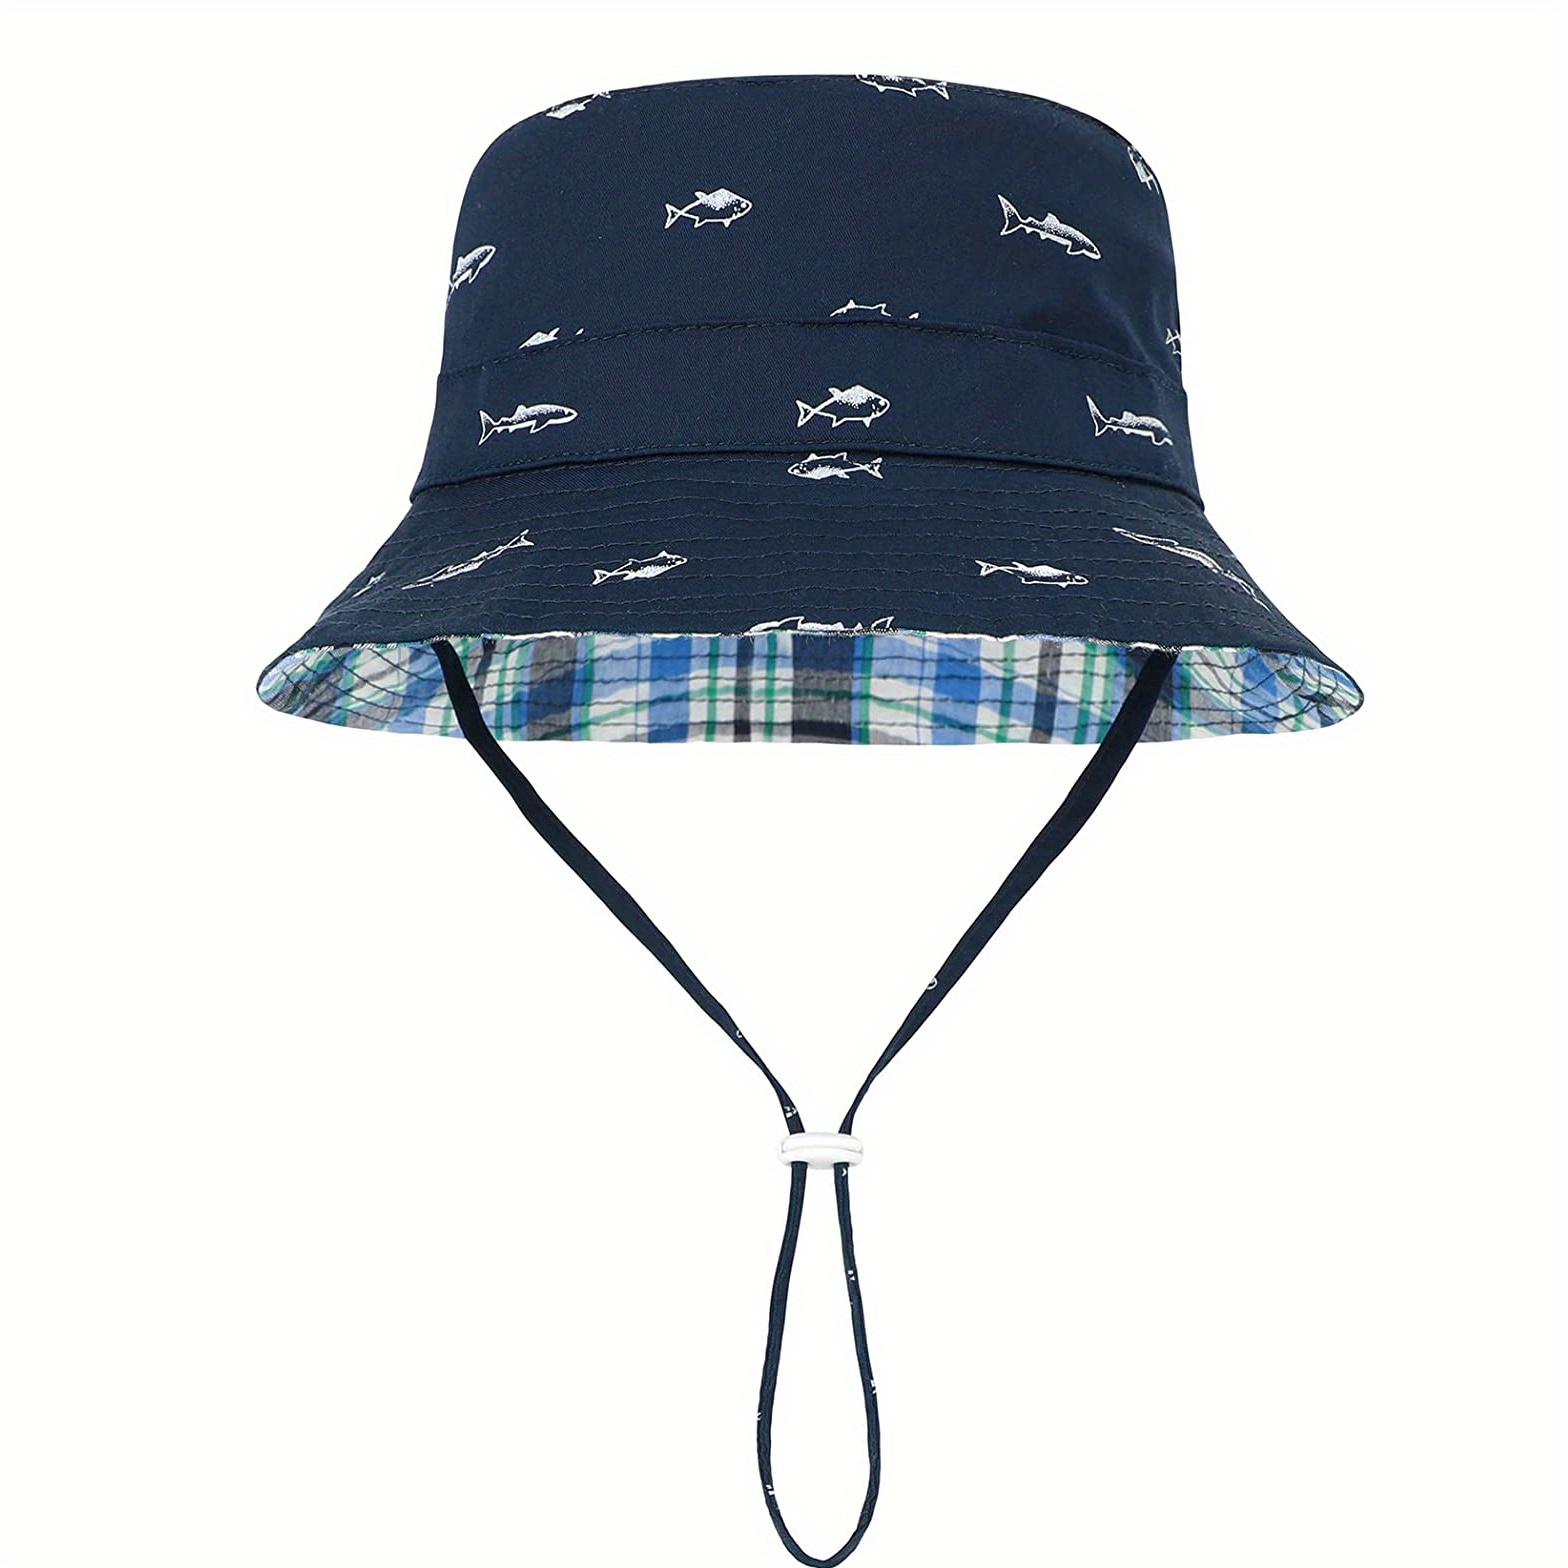 Cute Cartoon Fish Fisherman's Hat, Breathable Drawstrings Wide Brim Sun Protection Bucket Hat for Outdoor Traveling Beach Party, Christmas Gifts